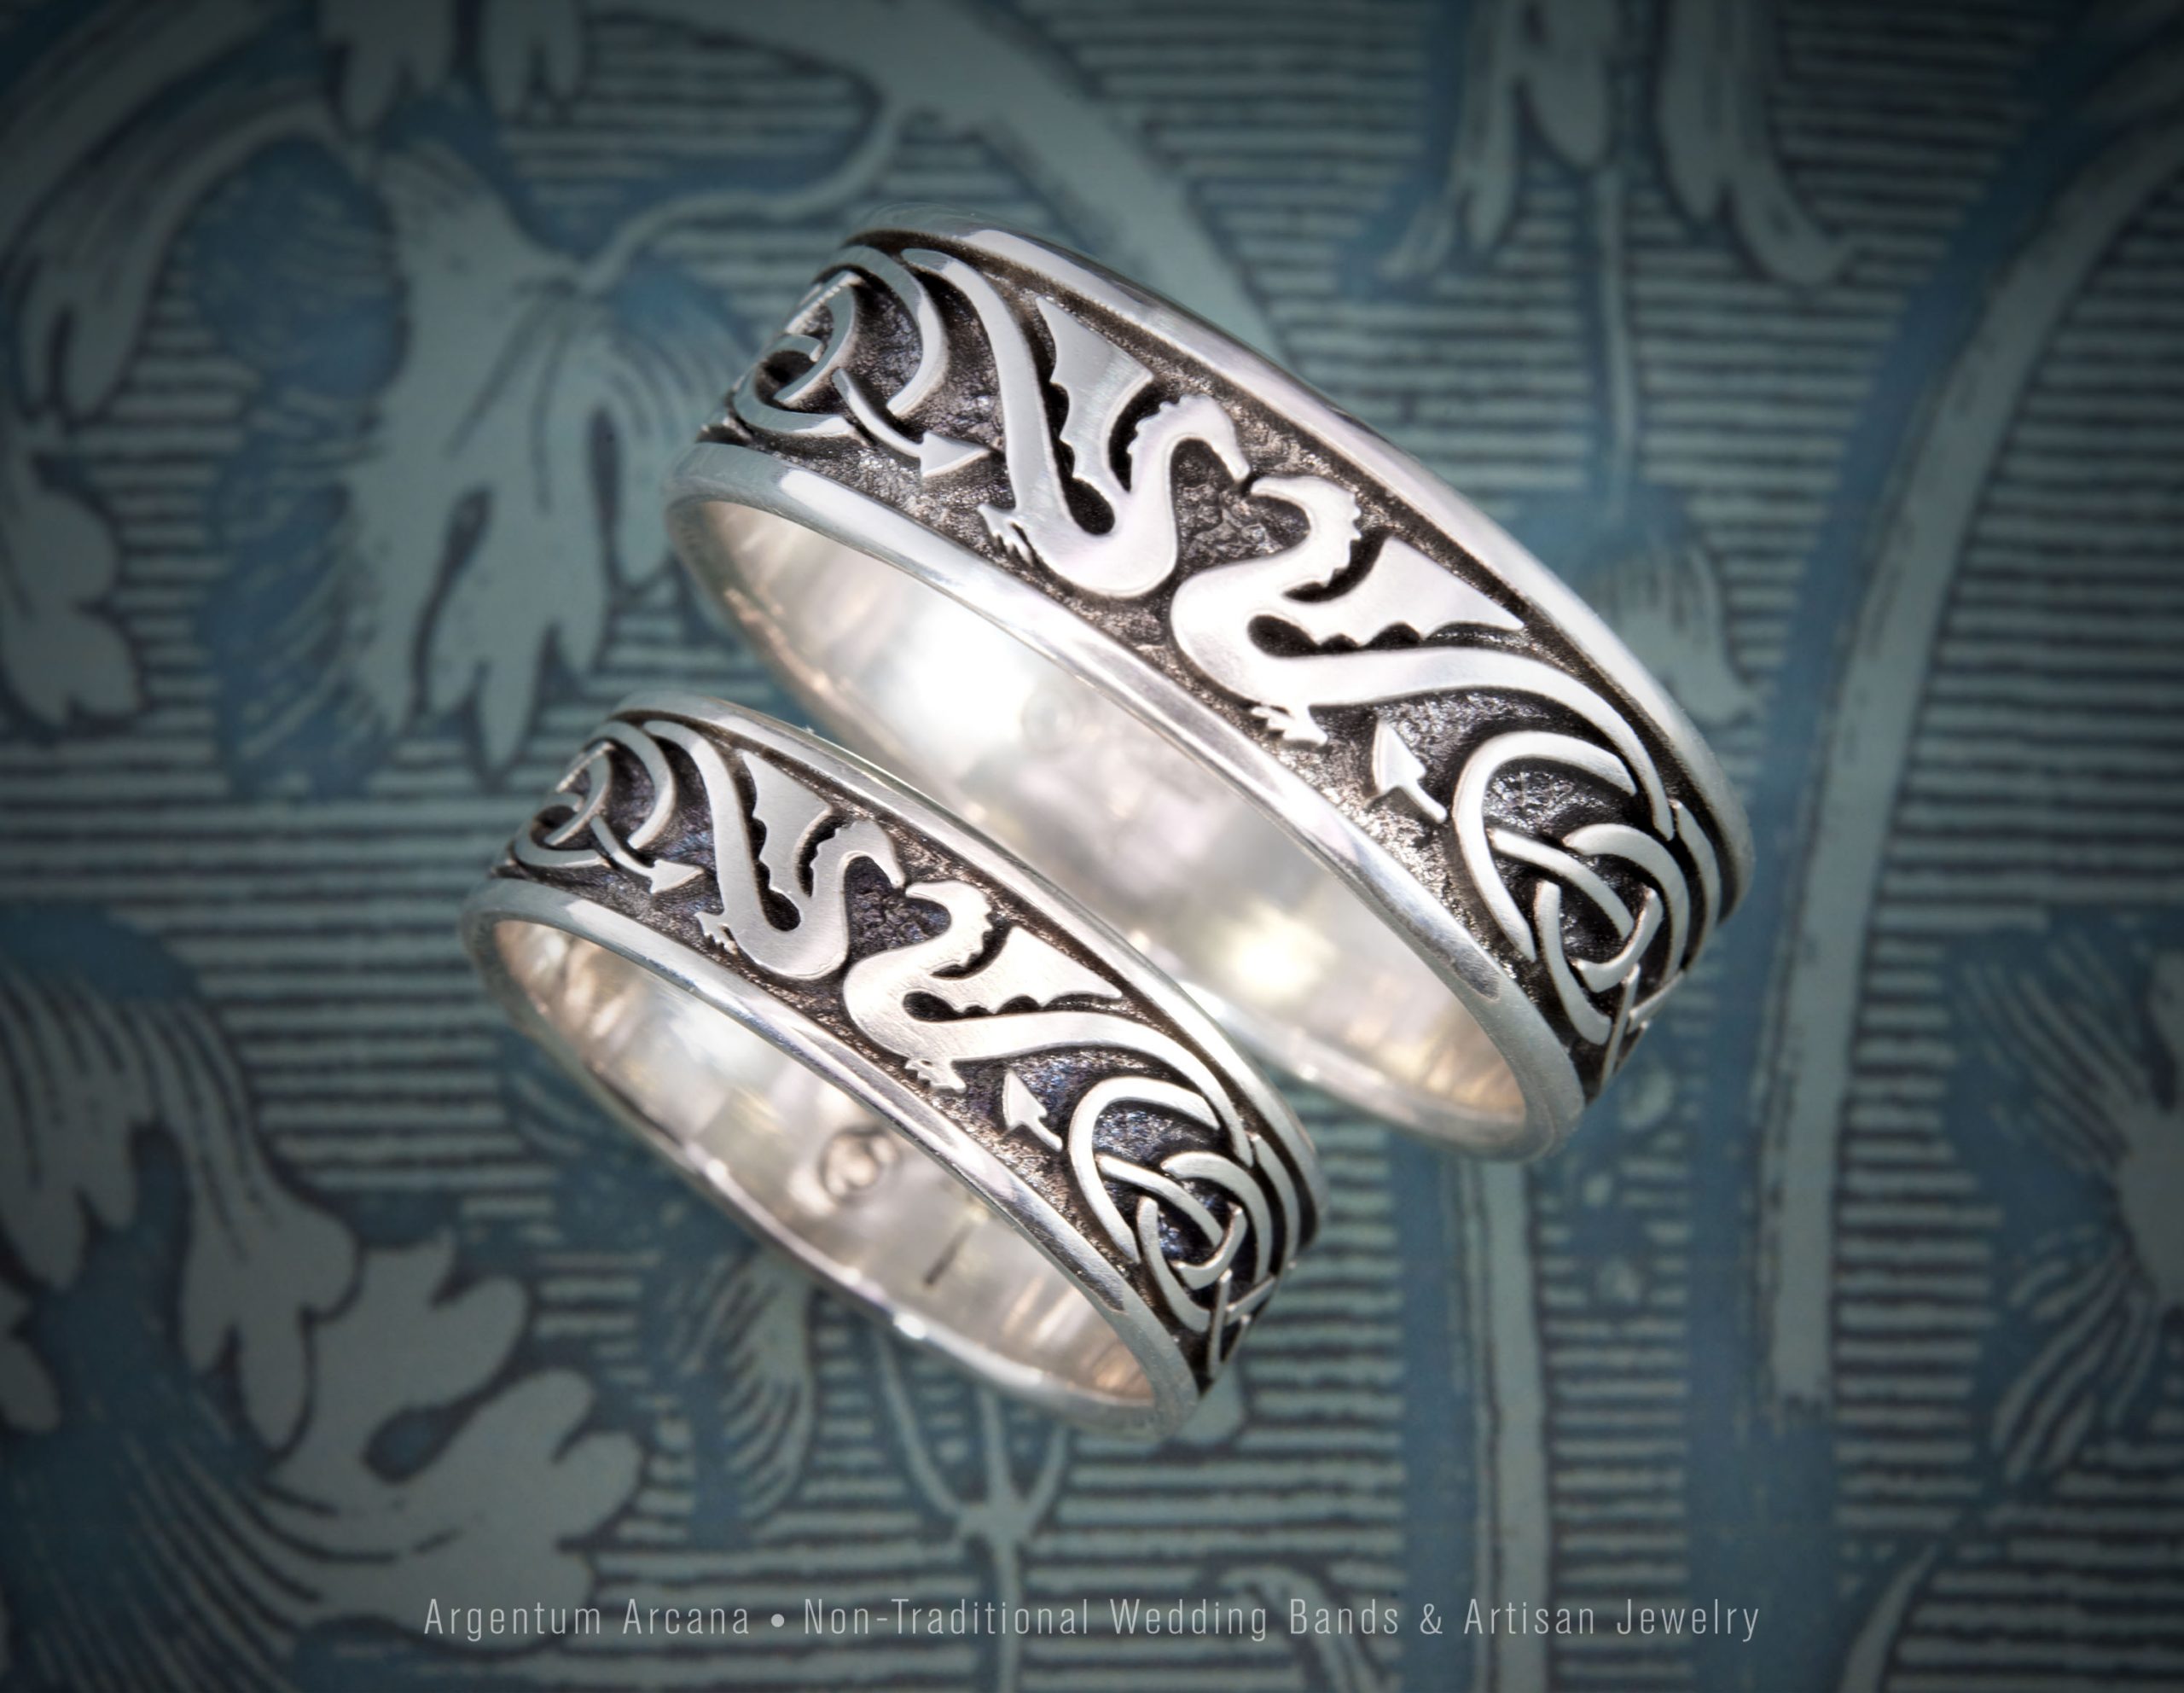 Pair of non-traditional matching wedding rings with Celtic Dragons and Celtic Knot motif